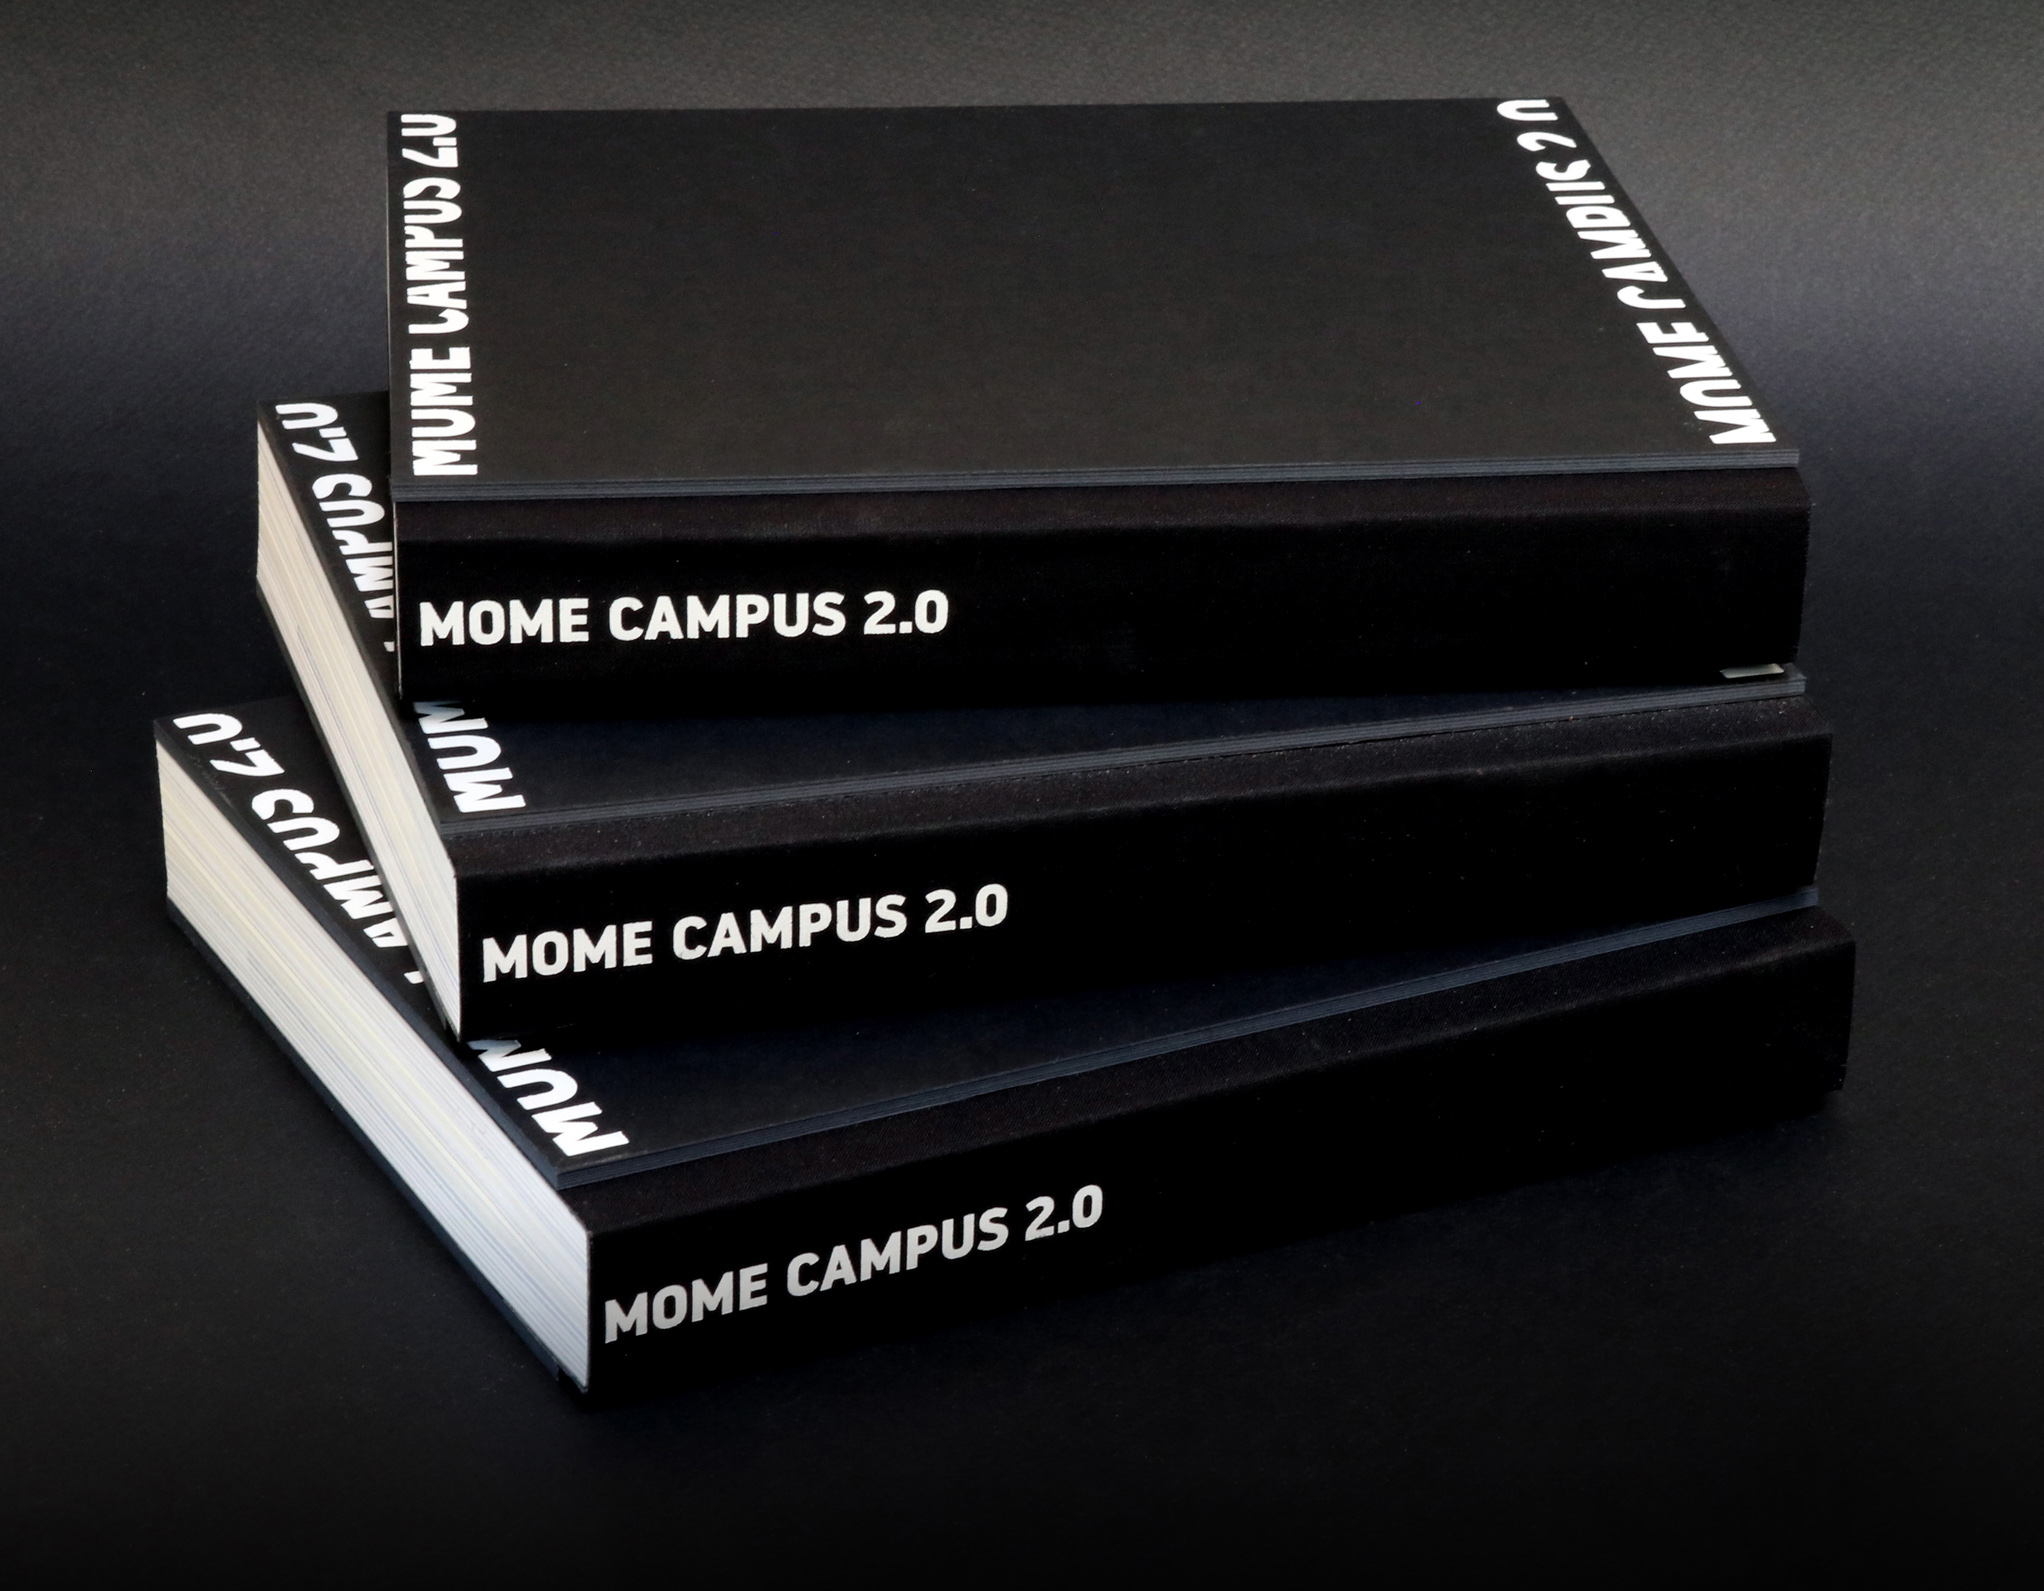 MOME Campus 2.0